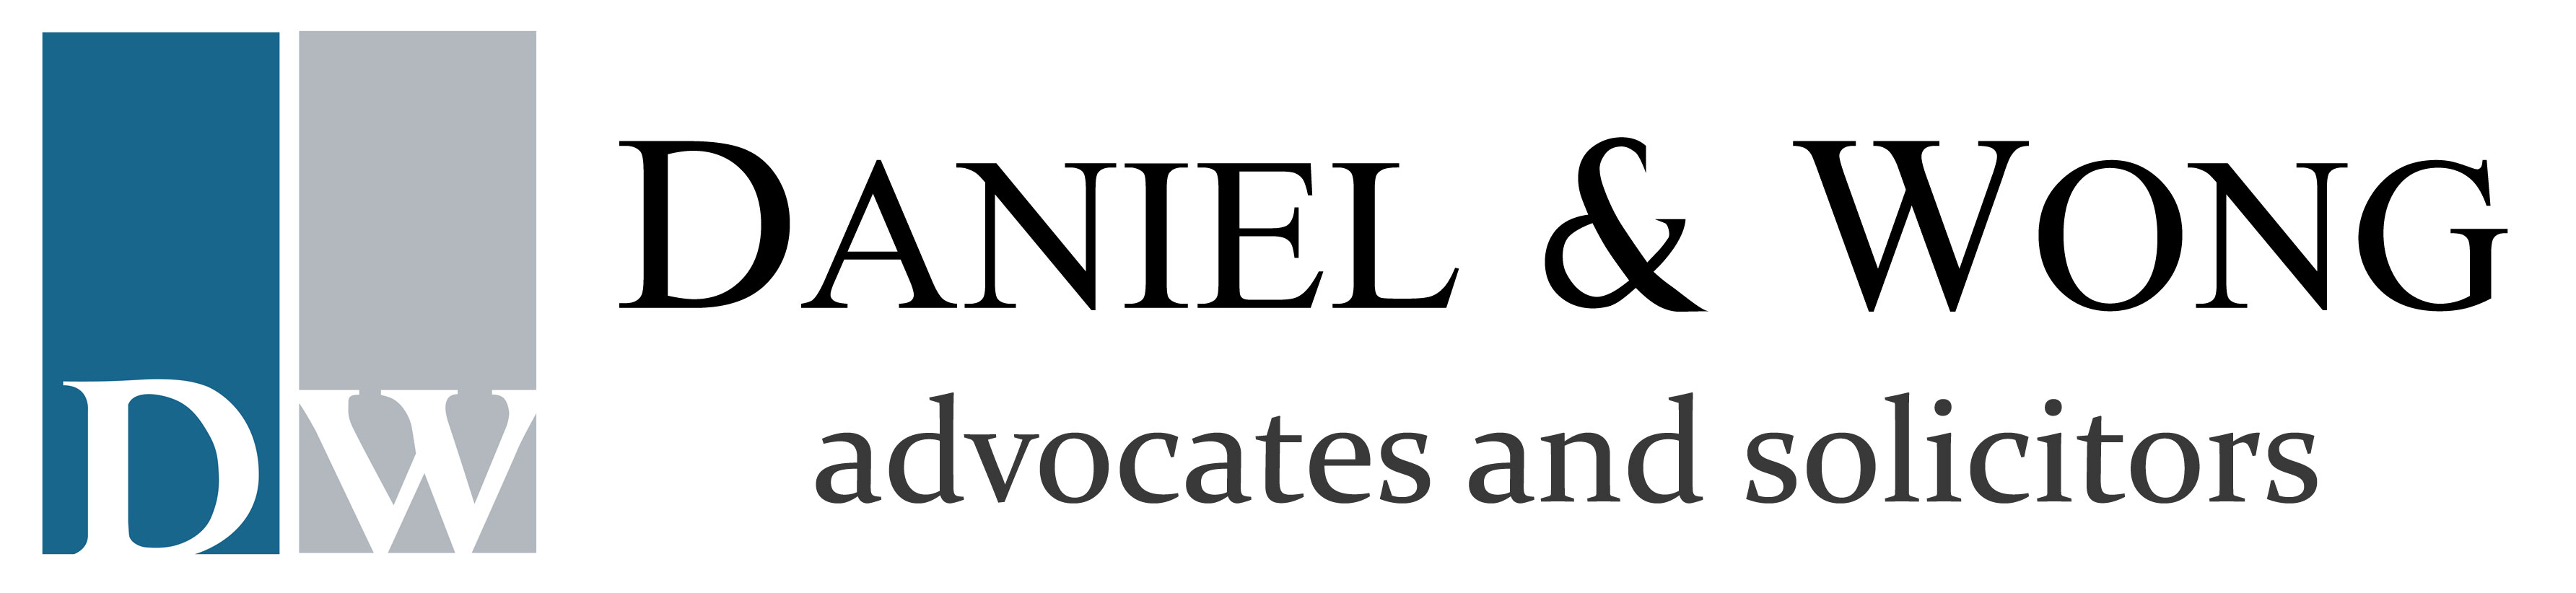 Daniel & Wong Advocates and Solicitors | Boutique Law Firm in KL